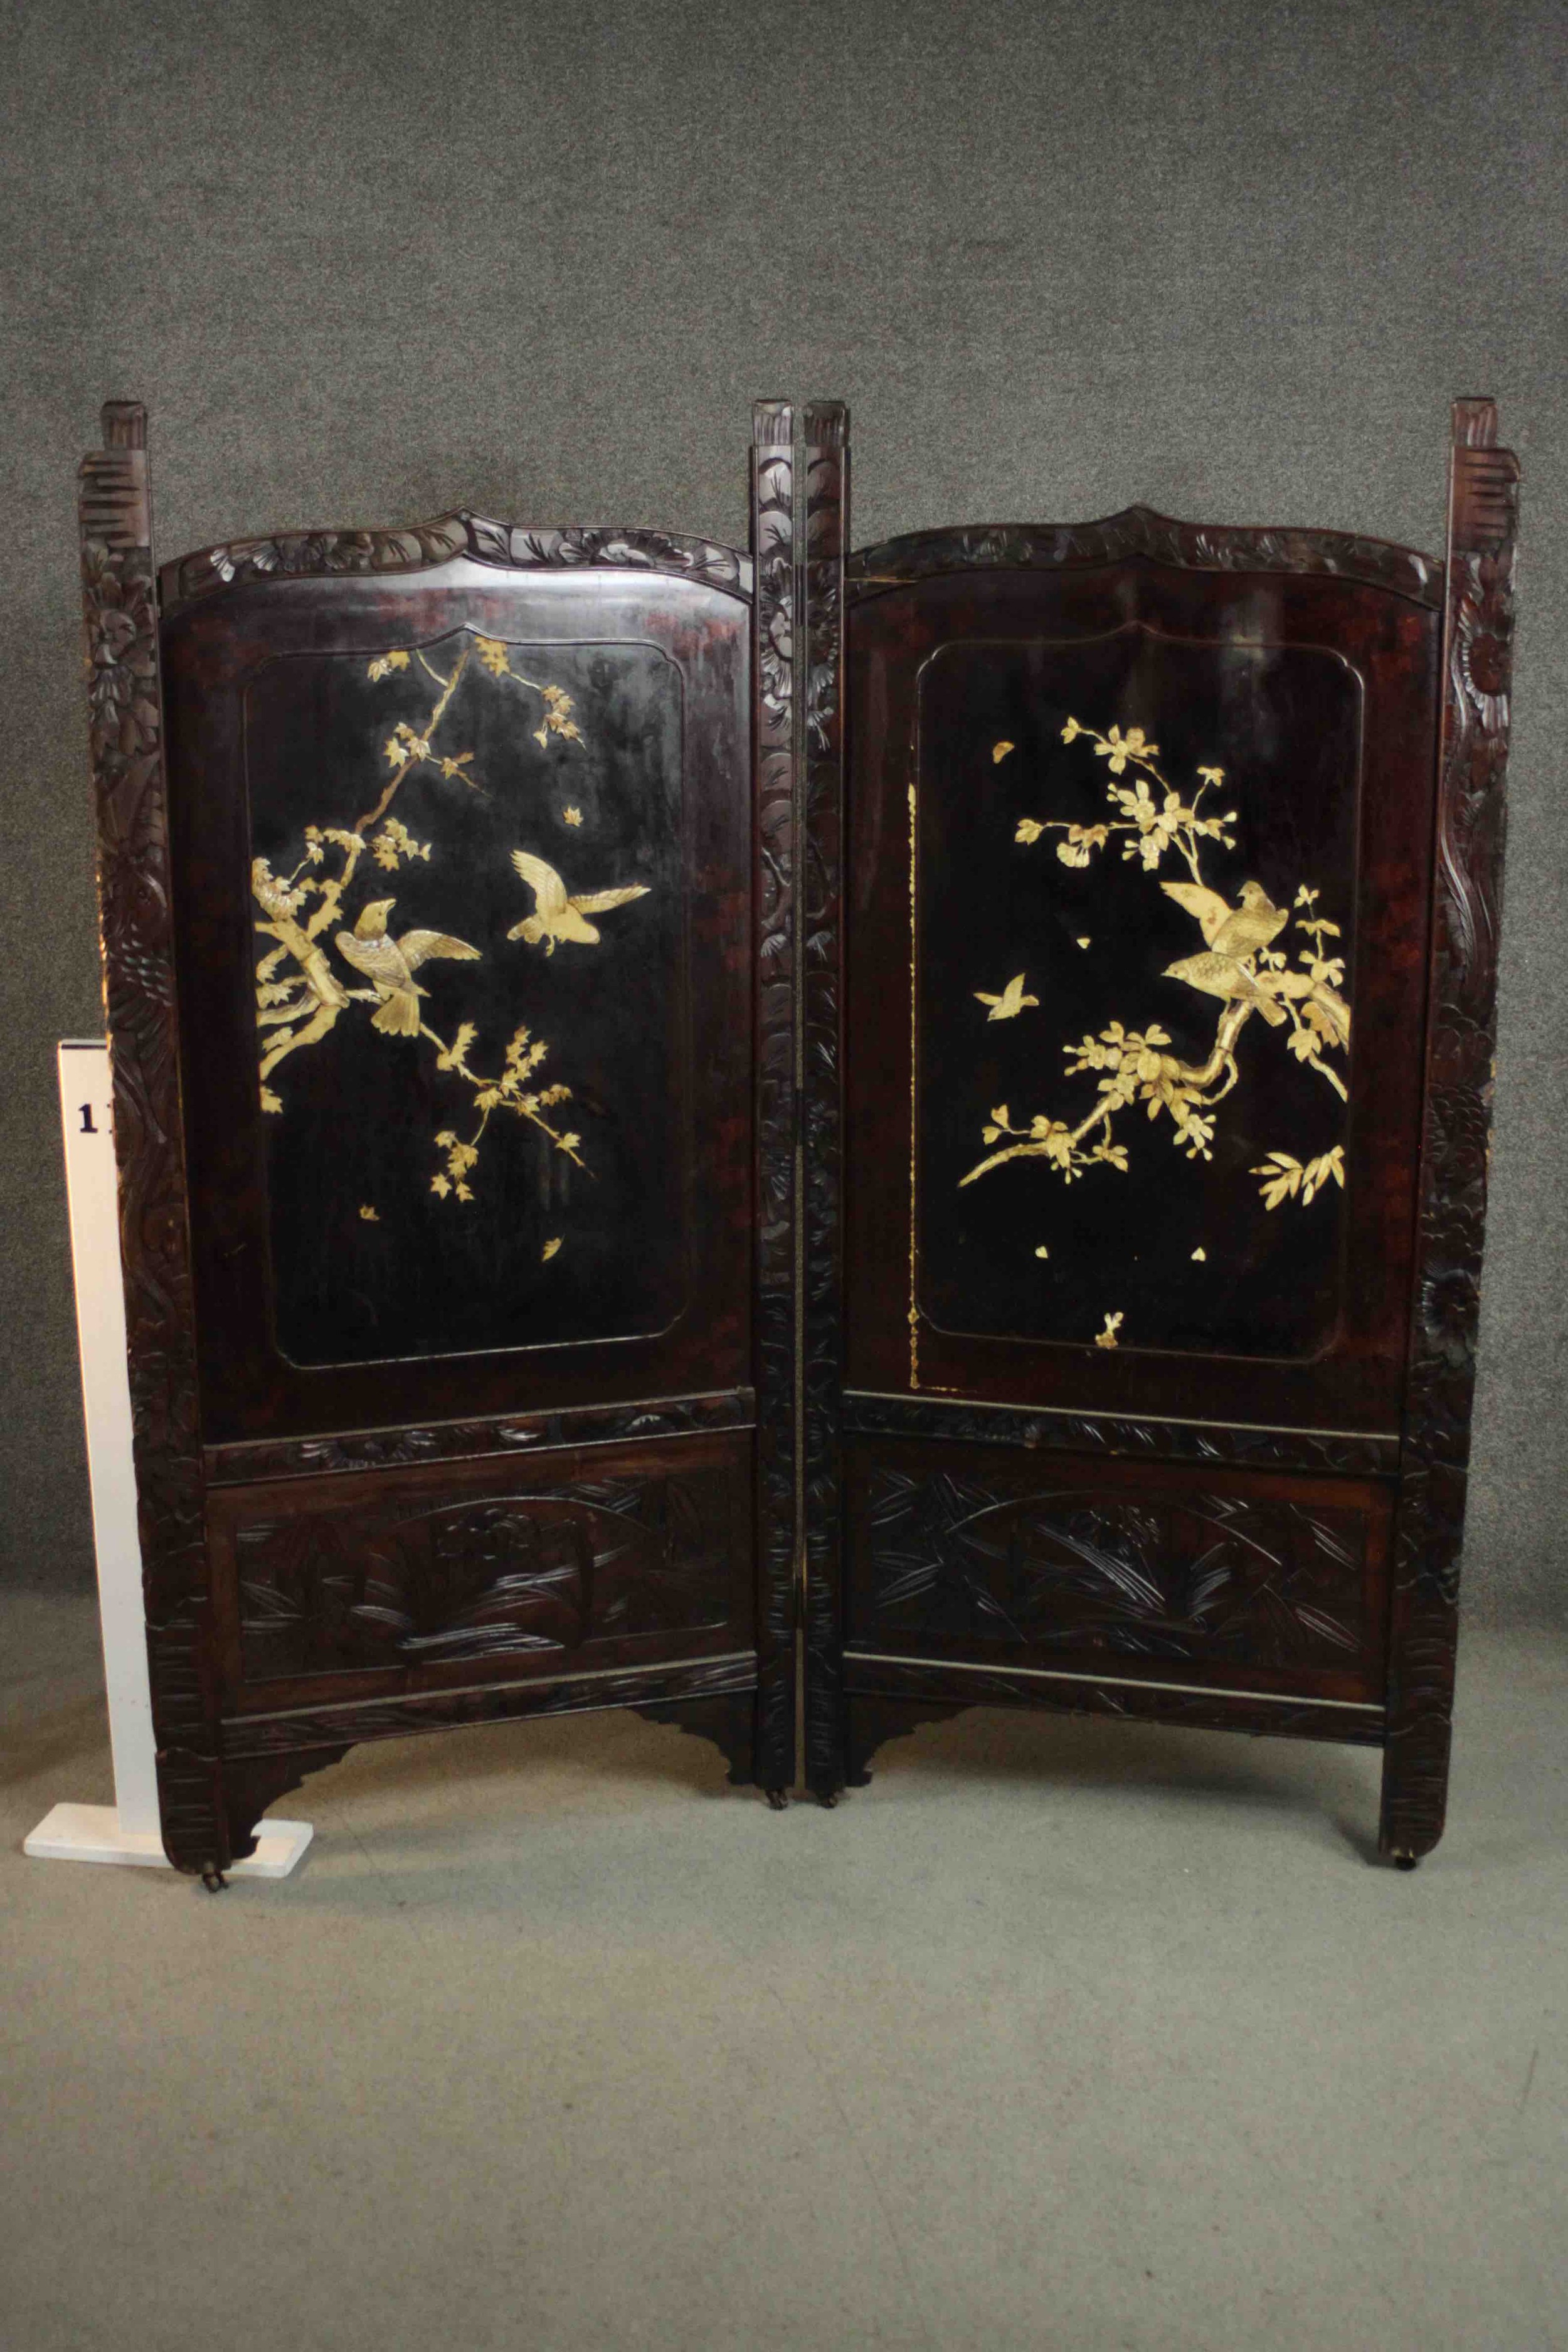 A late 19th or early 20th century Japanese two fold lacquered screen with carved bone inlaid - Image 2 of 10